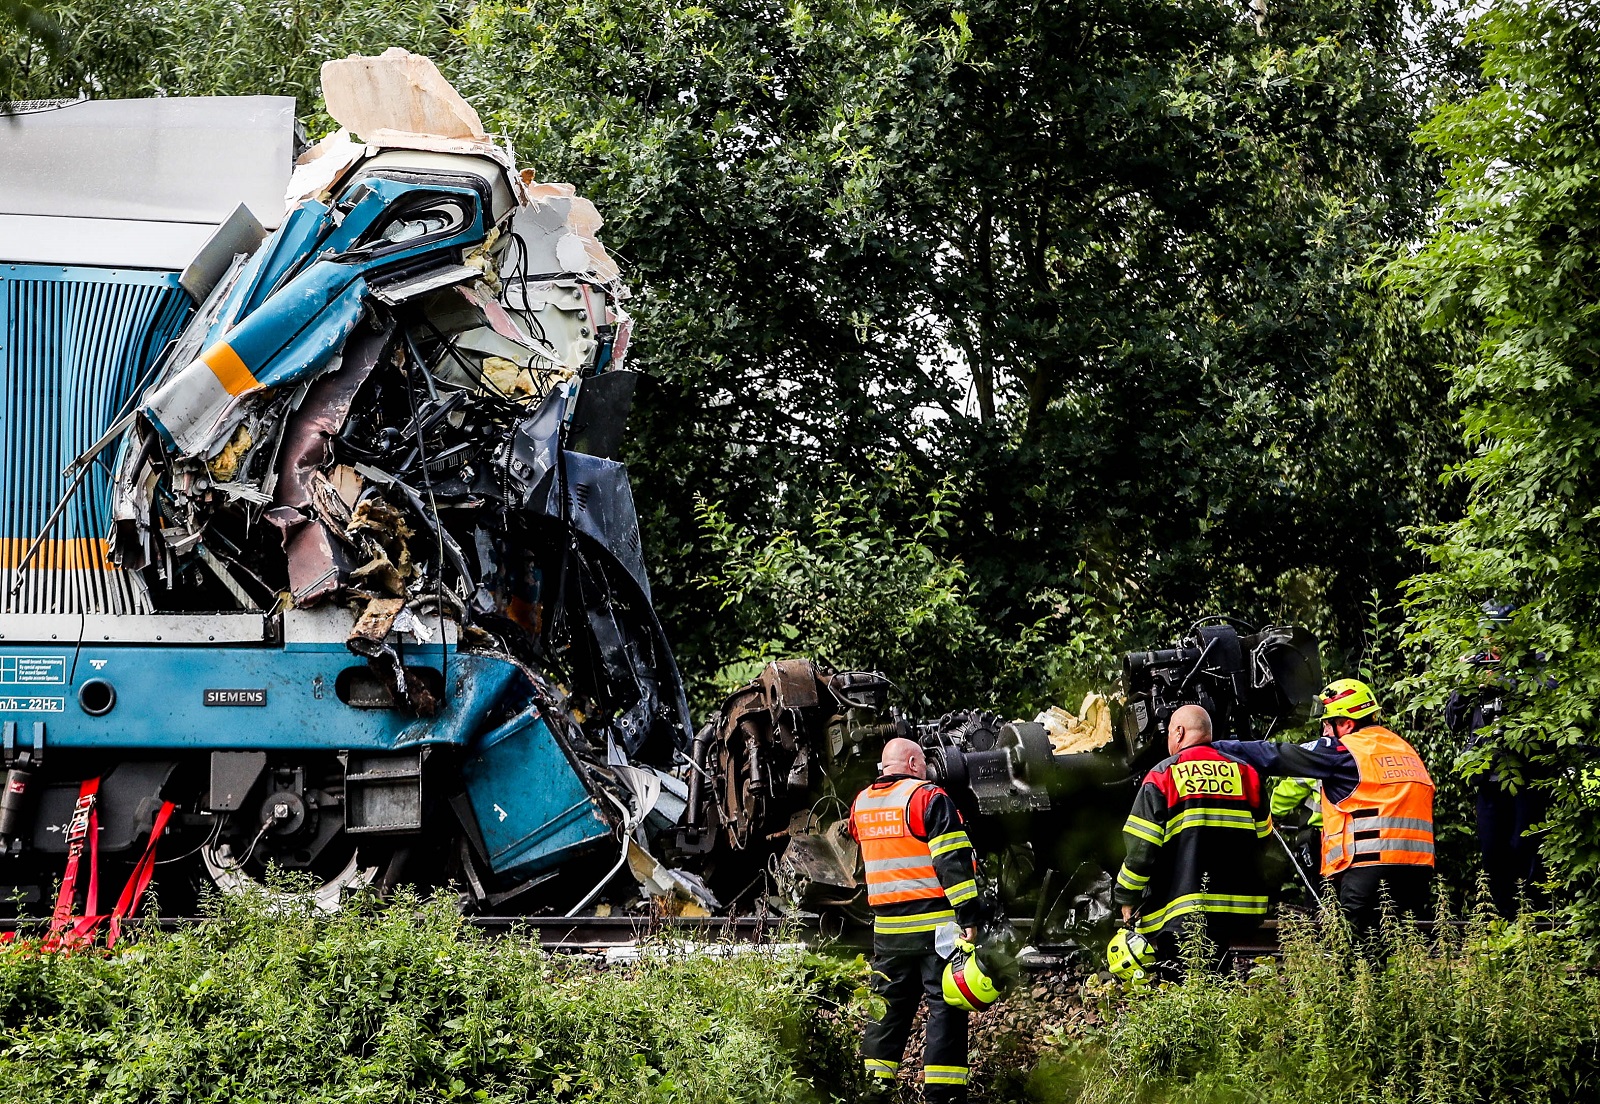 epa09393970 Rescuers at the scene of a train crash near the city of Domazlice, Czech Republic, 04 August 2021. According to state media citing firefighters, at least three people died and 38 were injured when a train coming from Munich and a local train collided.  EPA/MARTIN DIVISEK